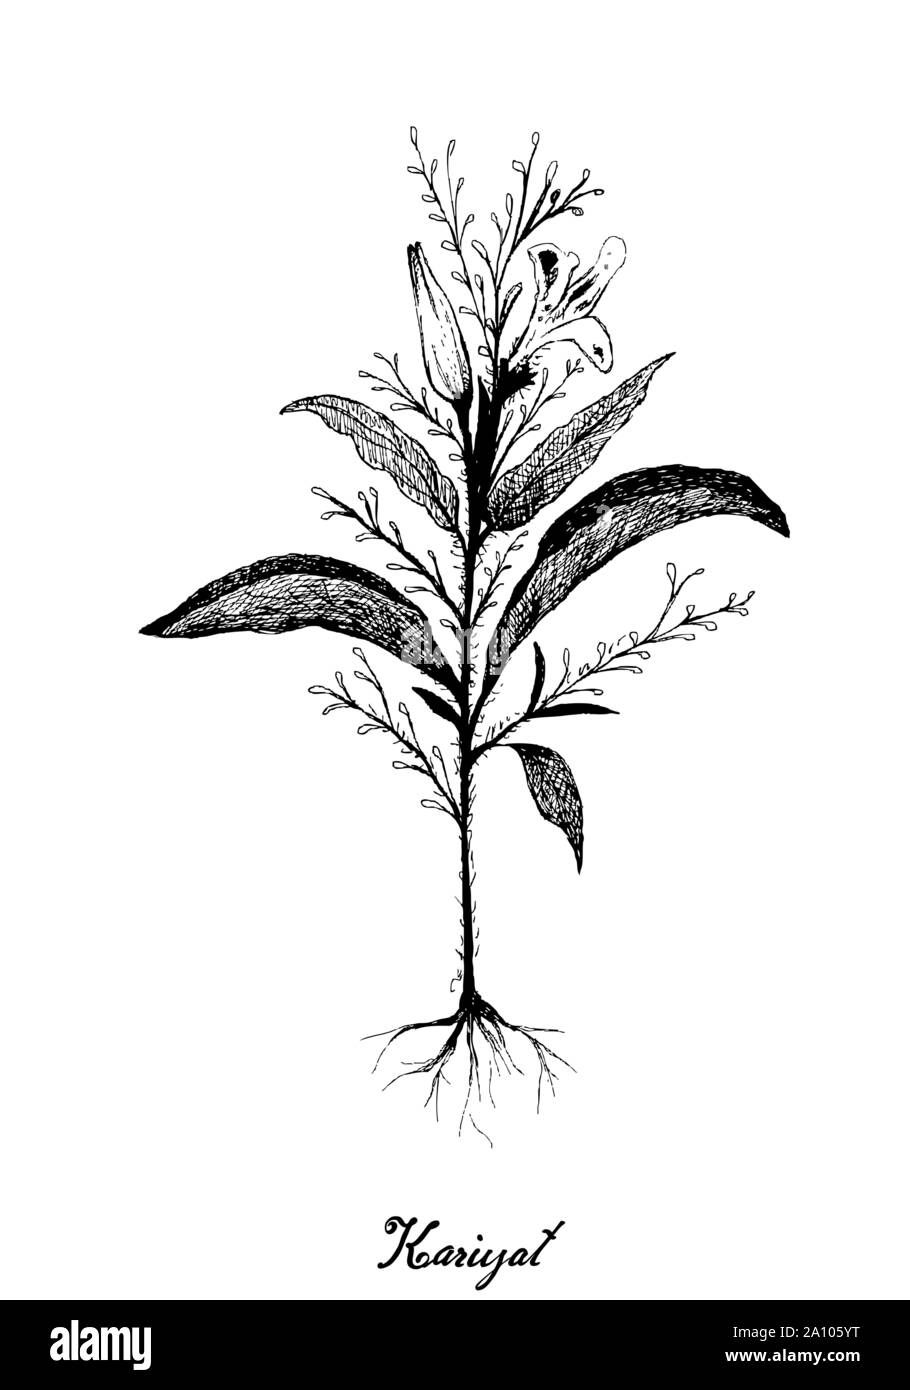 Vegetable and Herb, Hand Drawn Illustration of Kariyat or Andrographis Paniculata Plants. Ayurveda Herbal Medicine Used to Treat Infections and Some D Stock Vector